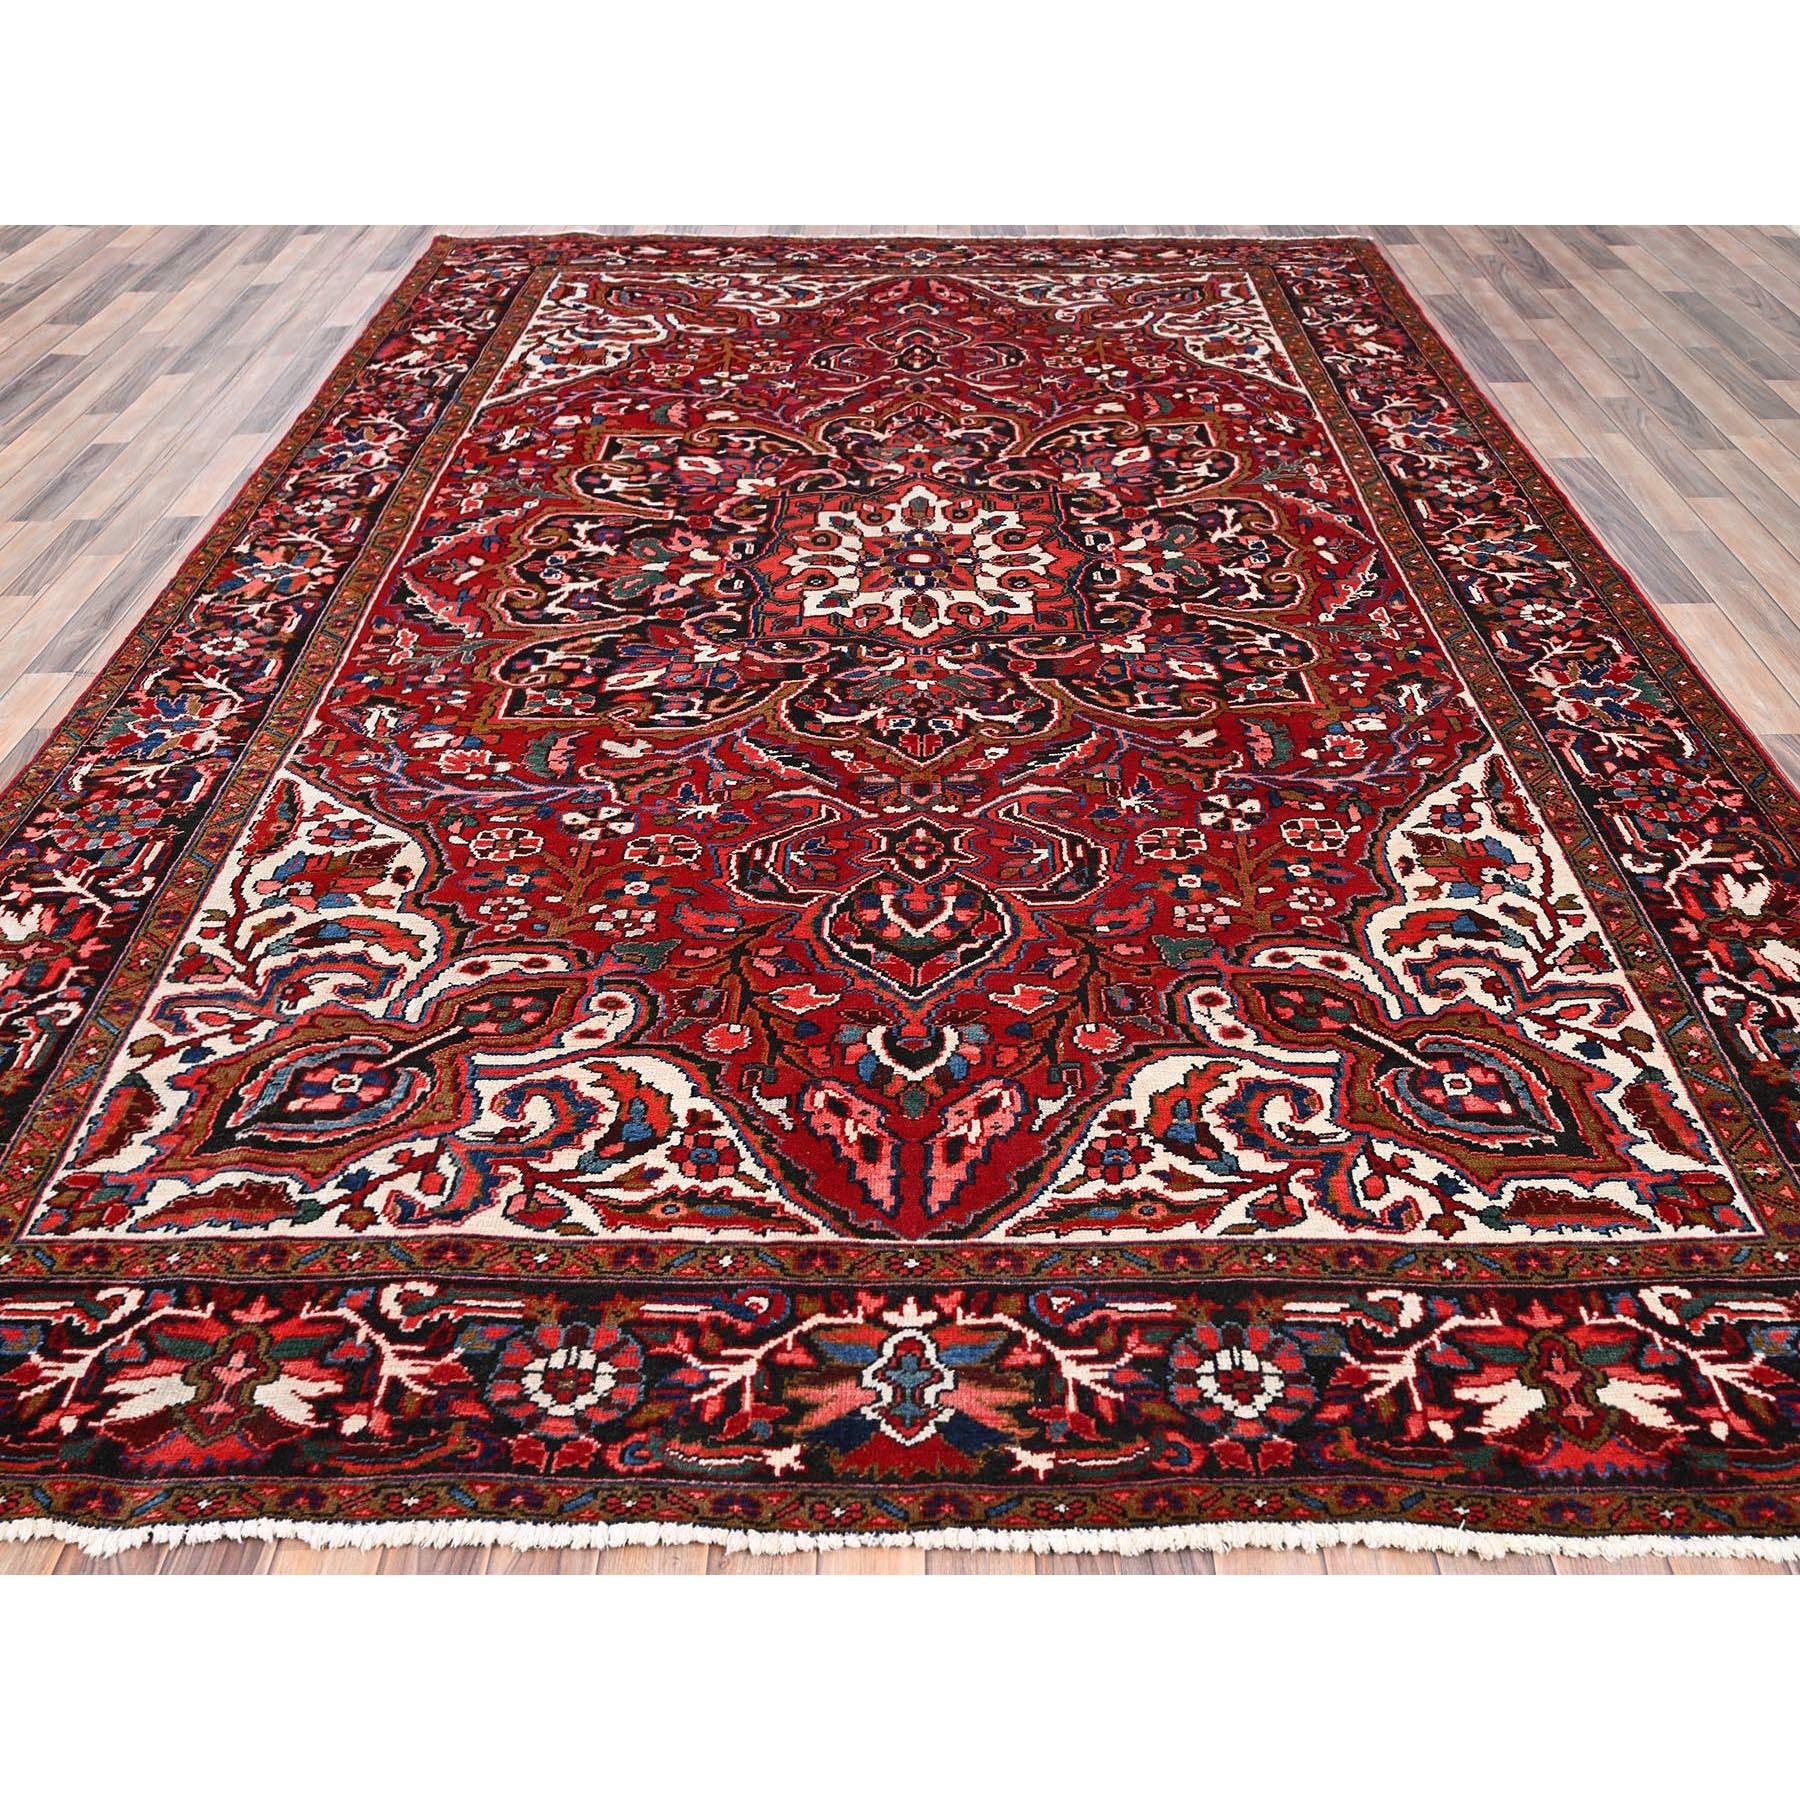 Heriz Serapi Red Rustic Feel Evenly Worn Pure Wool Hand Knotted Vintage Persian Heriz Rug For Sale